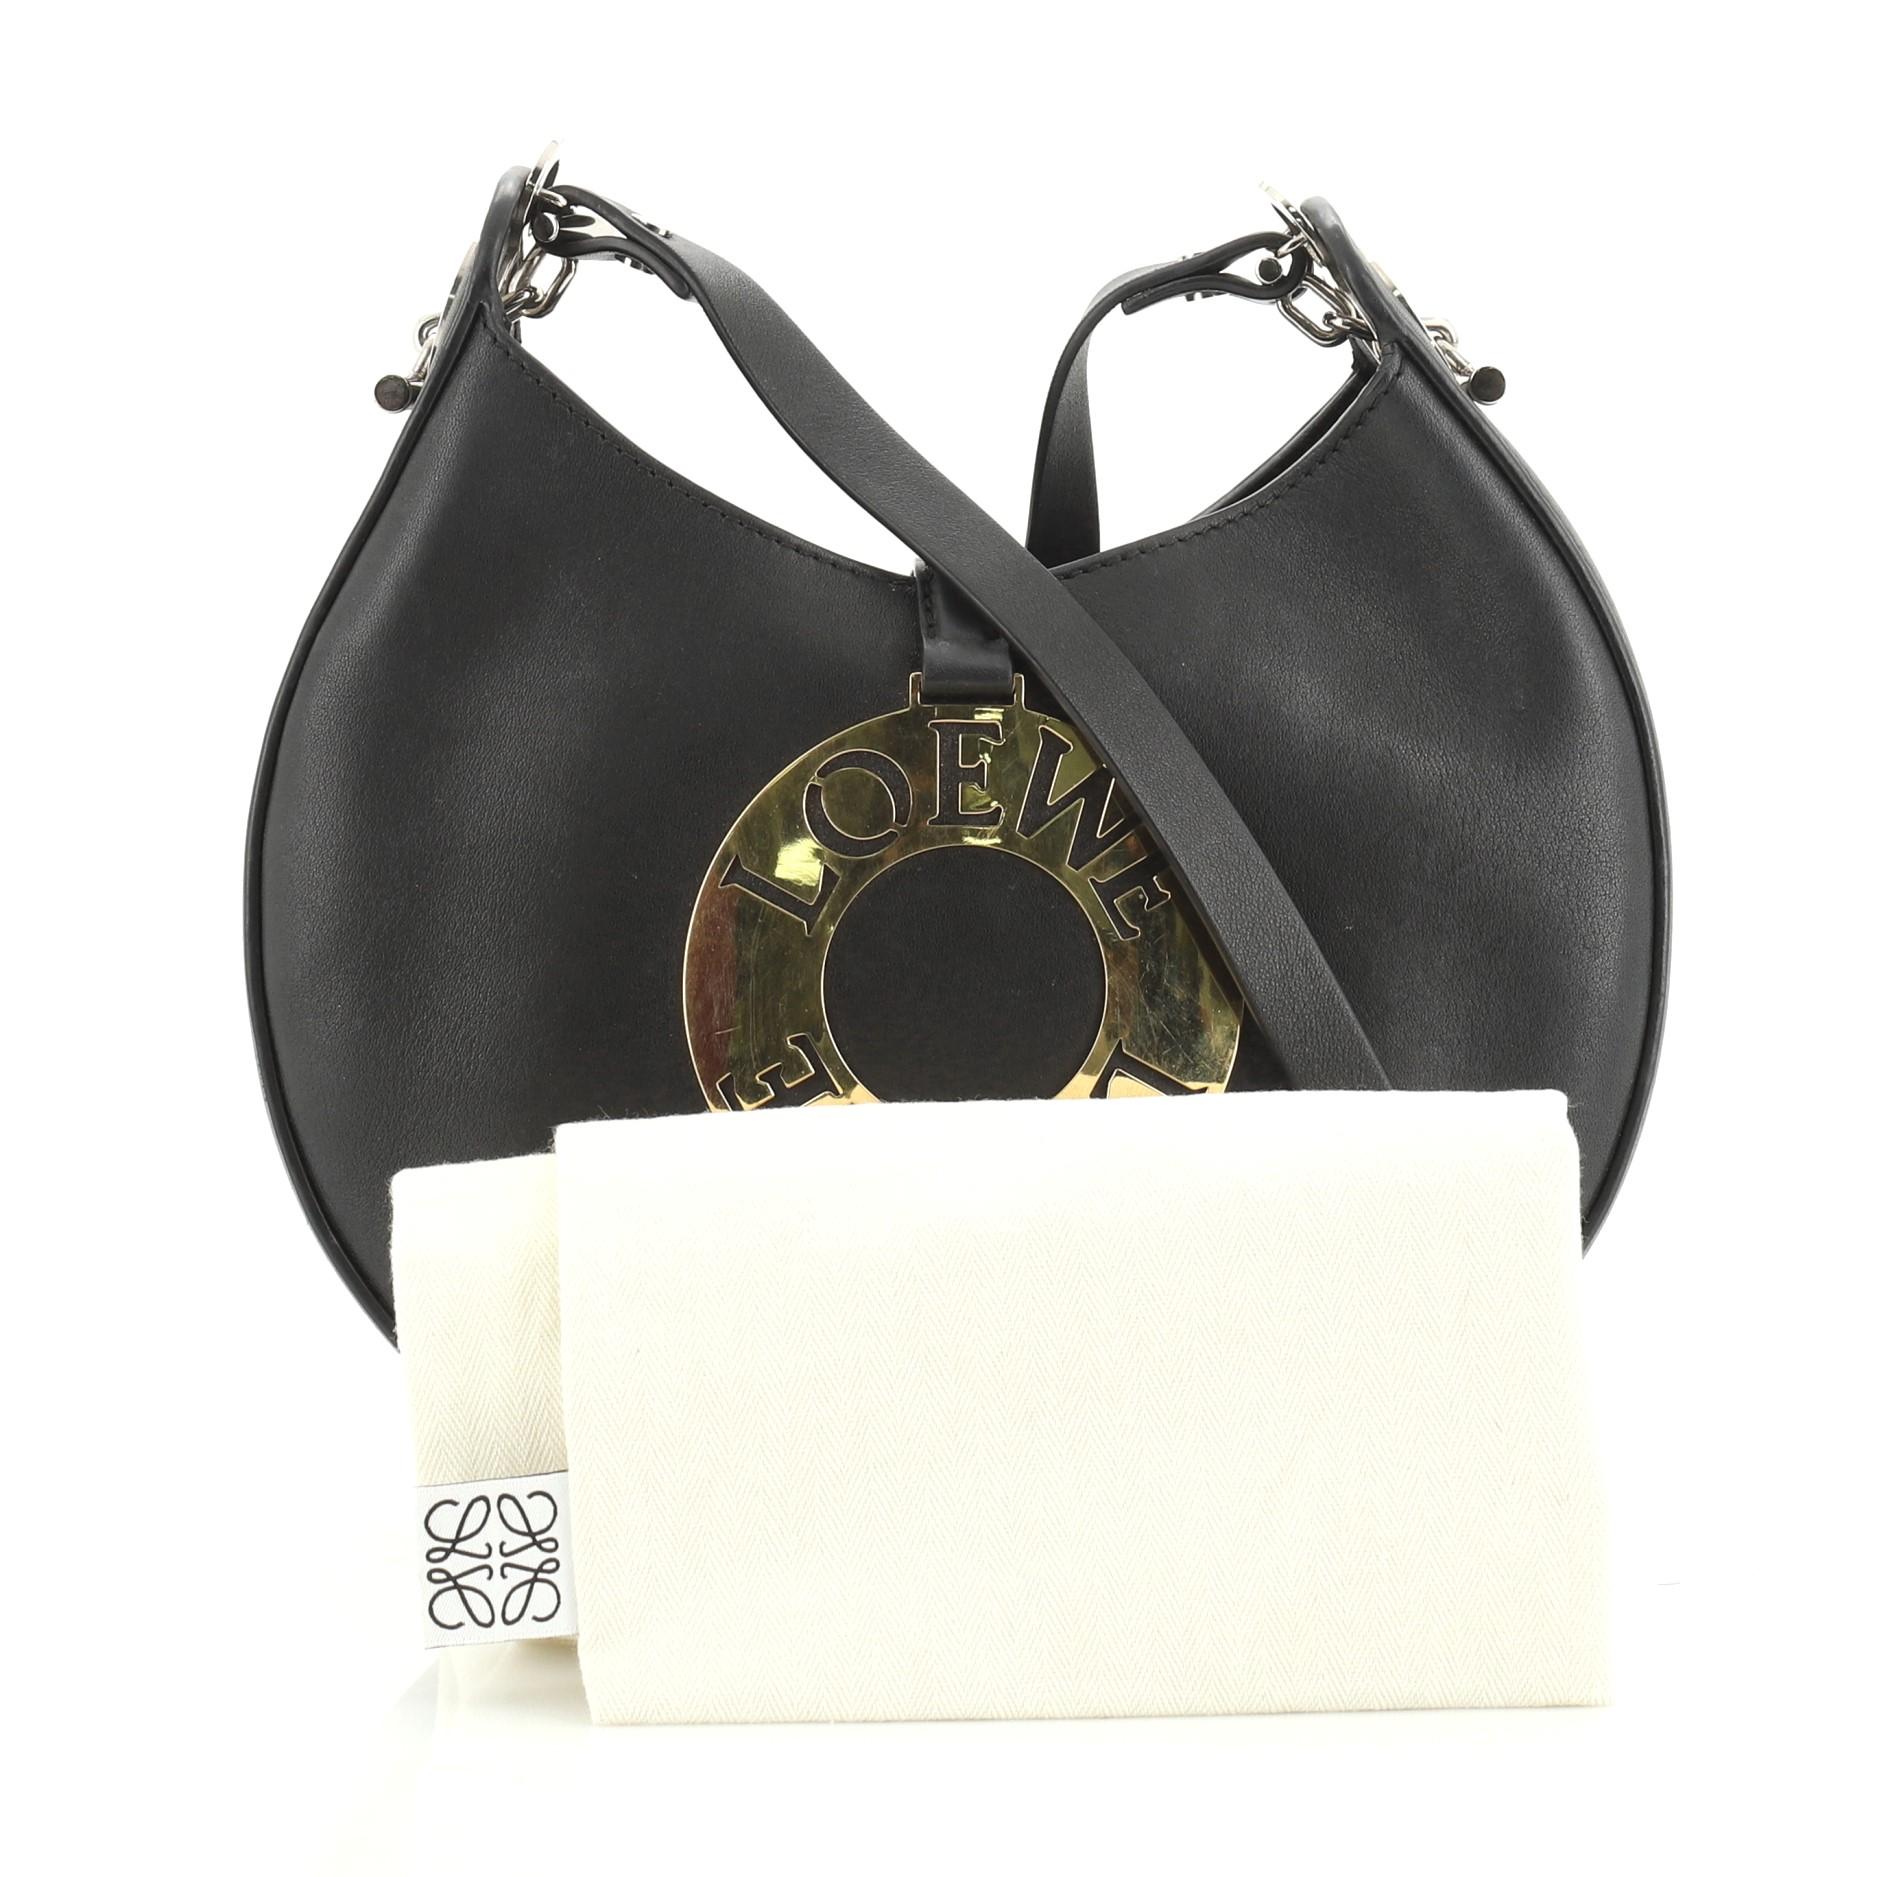 This Loewe Joyce Shoulder Bag Leather Small, crafted in black leather, features a leather shoulder strap, crescent shape, jewelry-inspired gold plaque and gold and silver-tone hardware. Its snap tab closure opens to a black leather interior, with